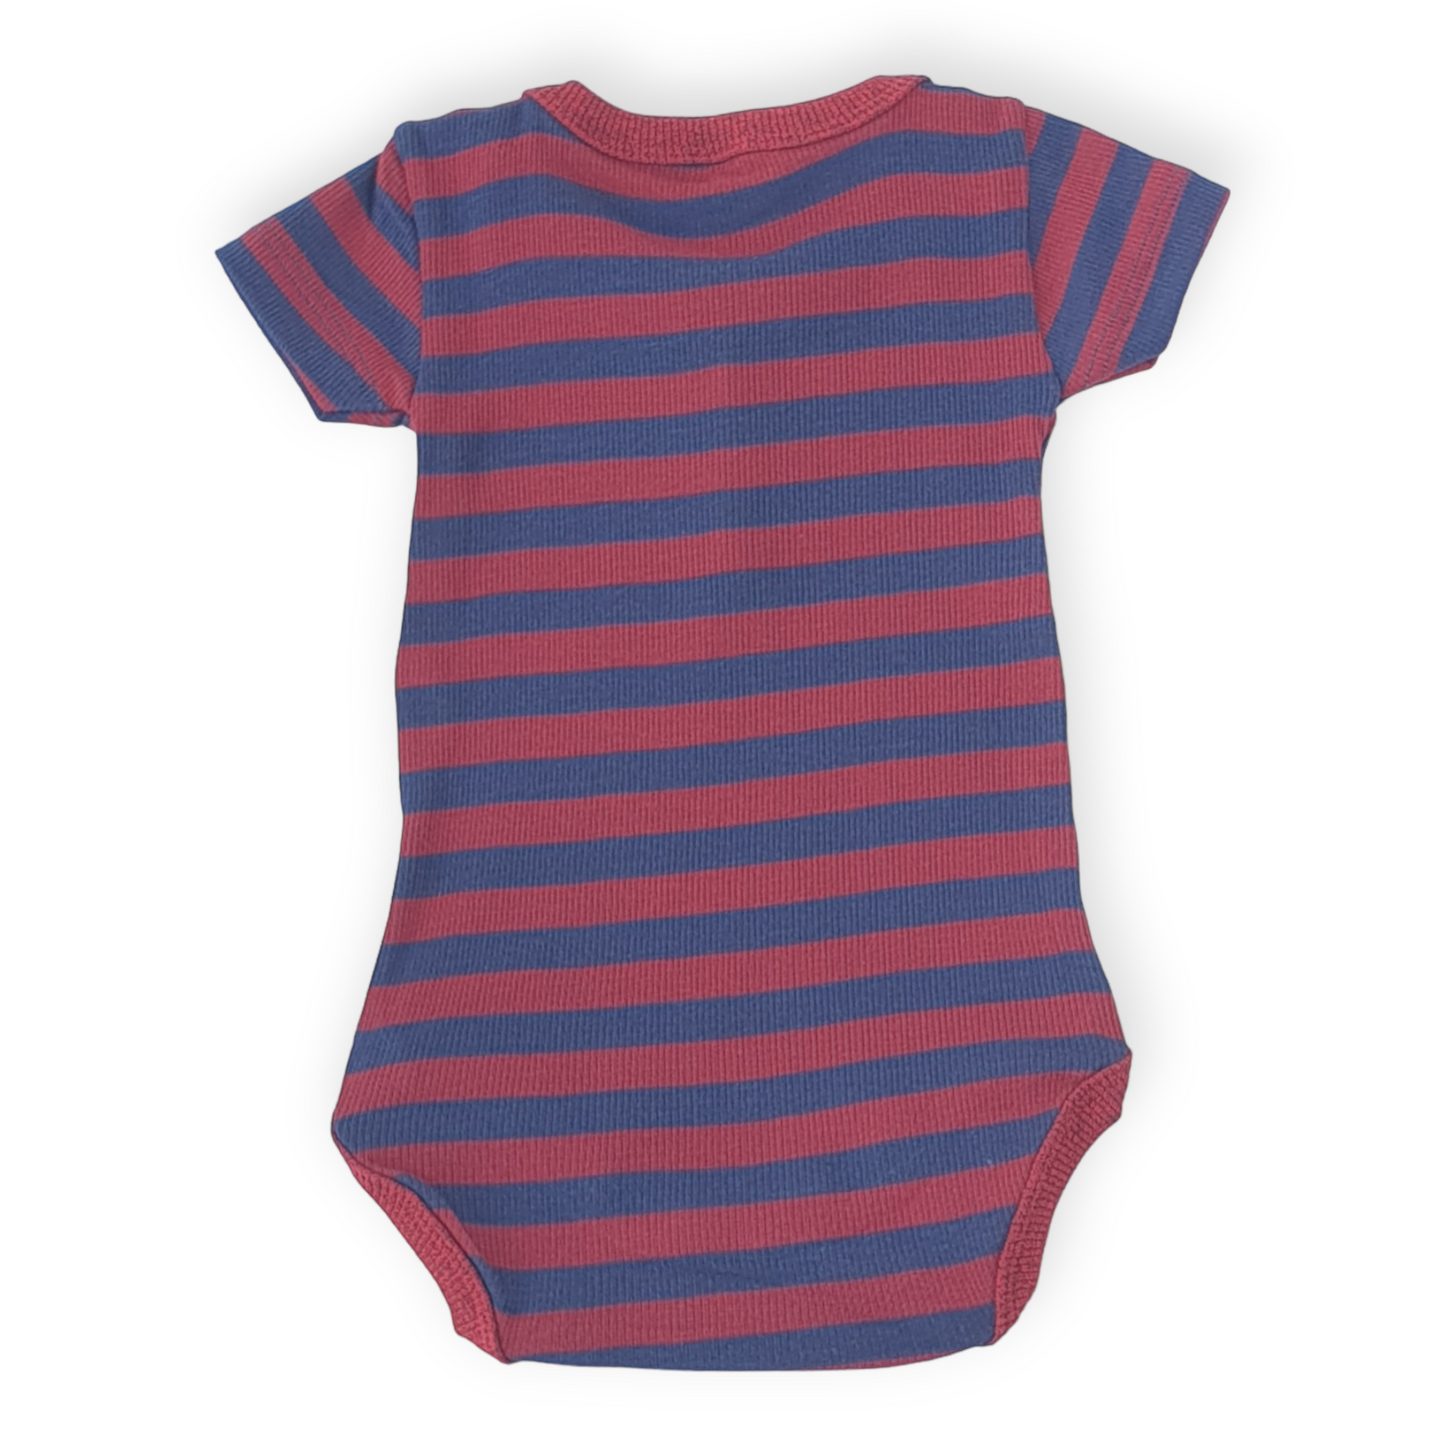 Striped Red and Blue Unisex Body